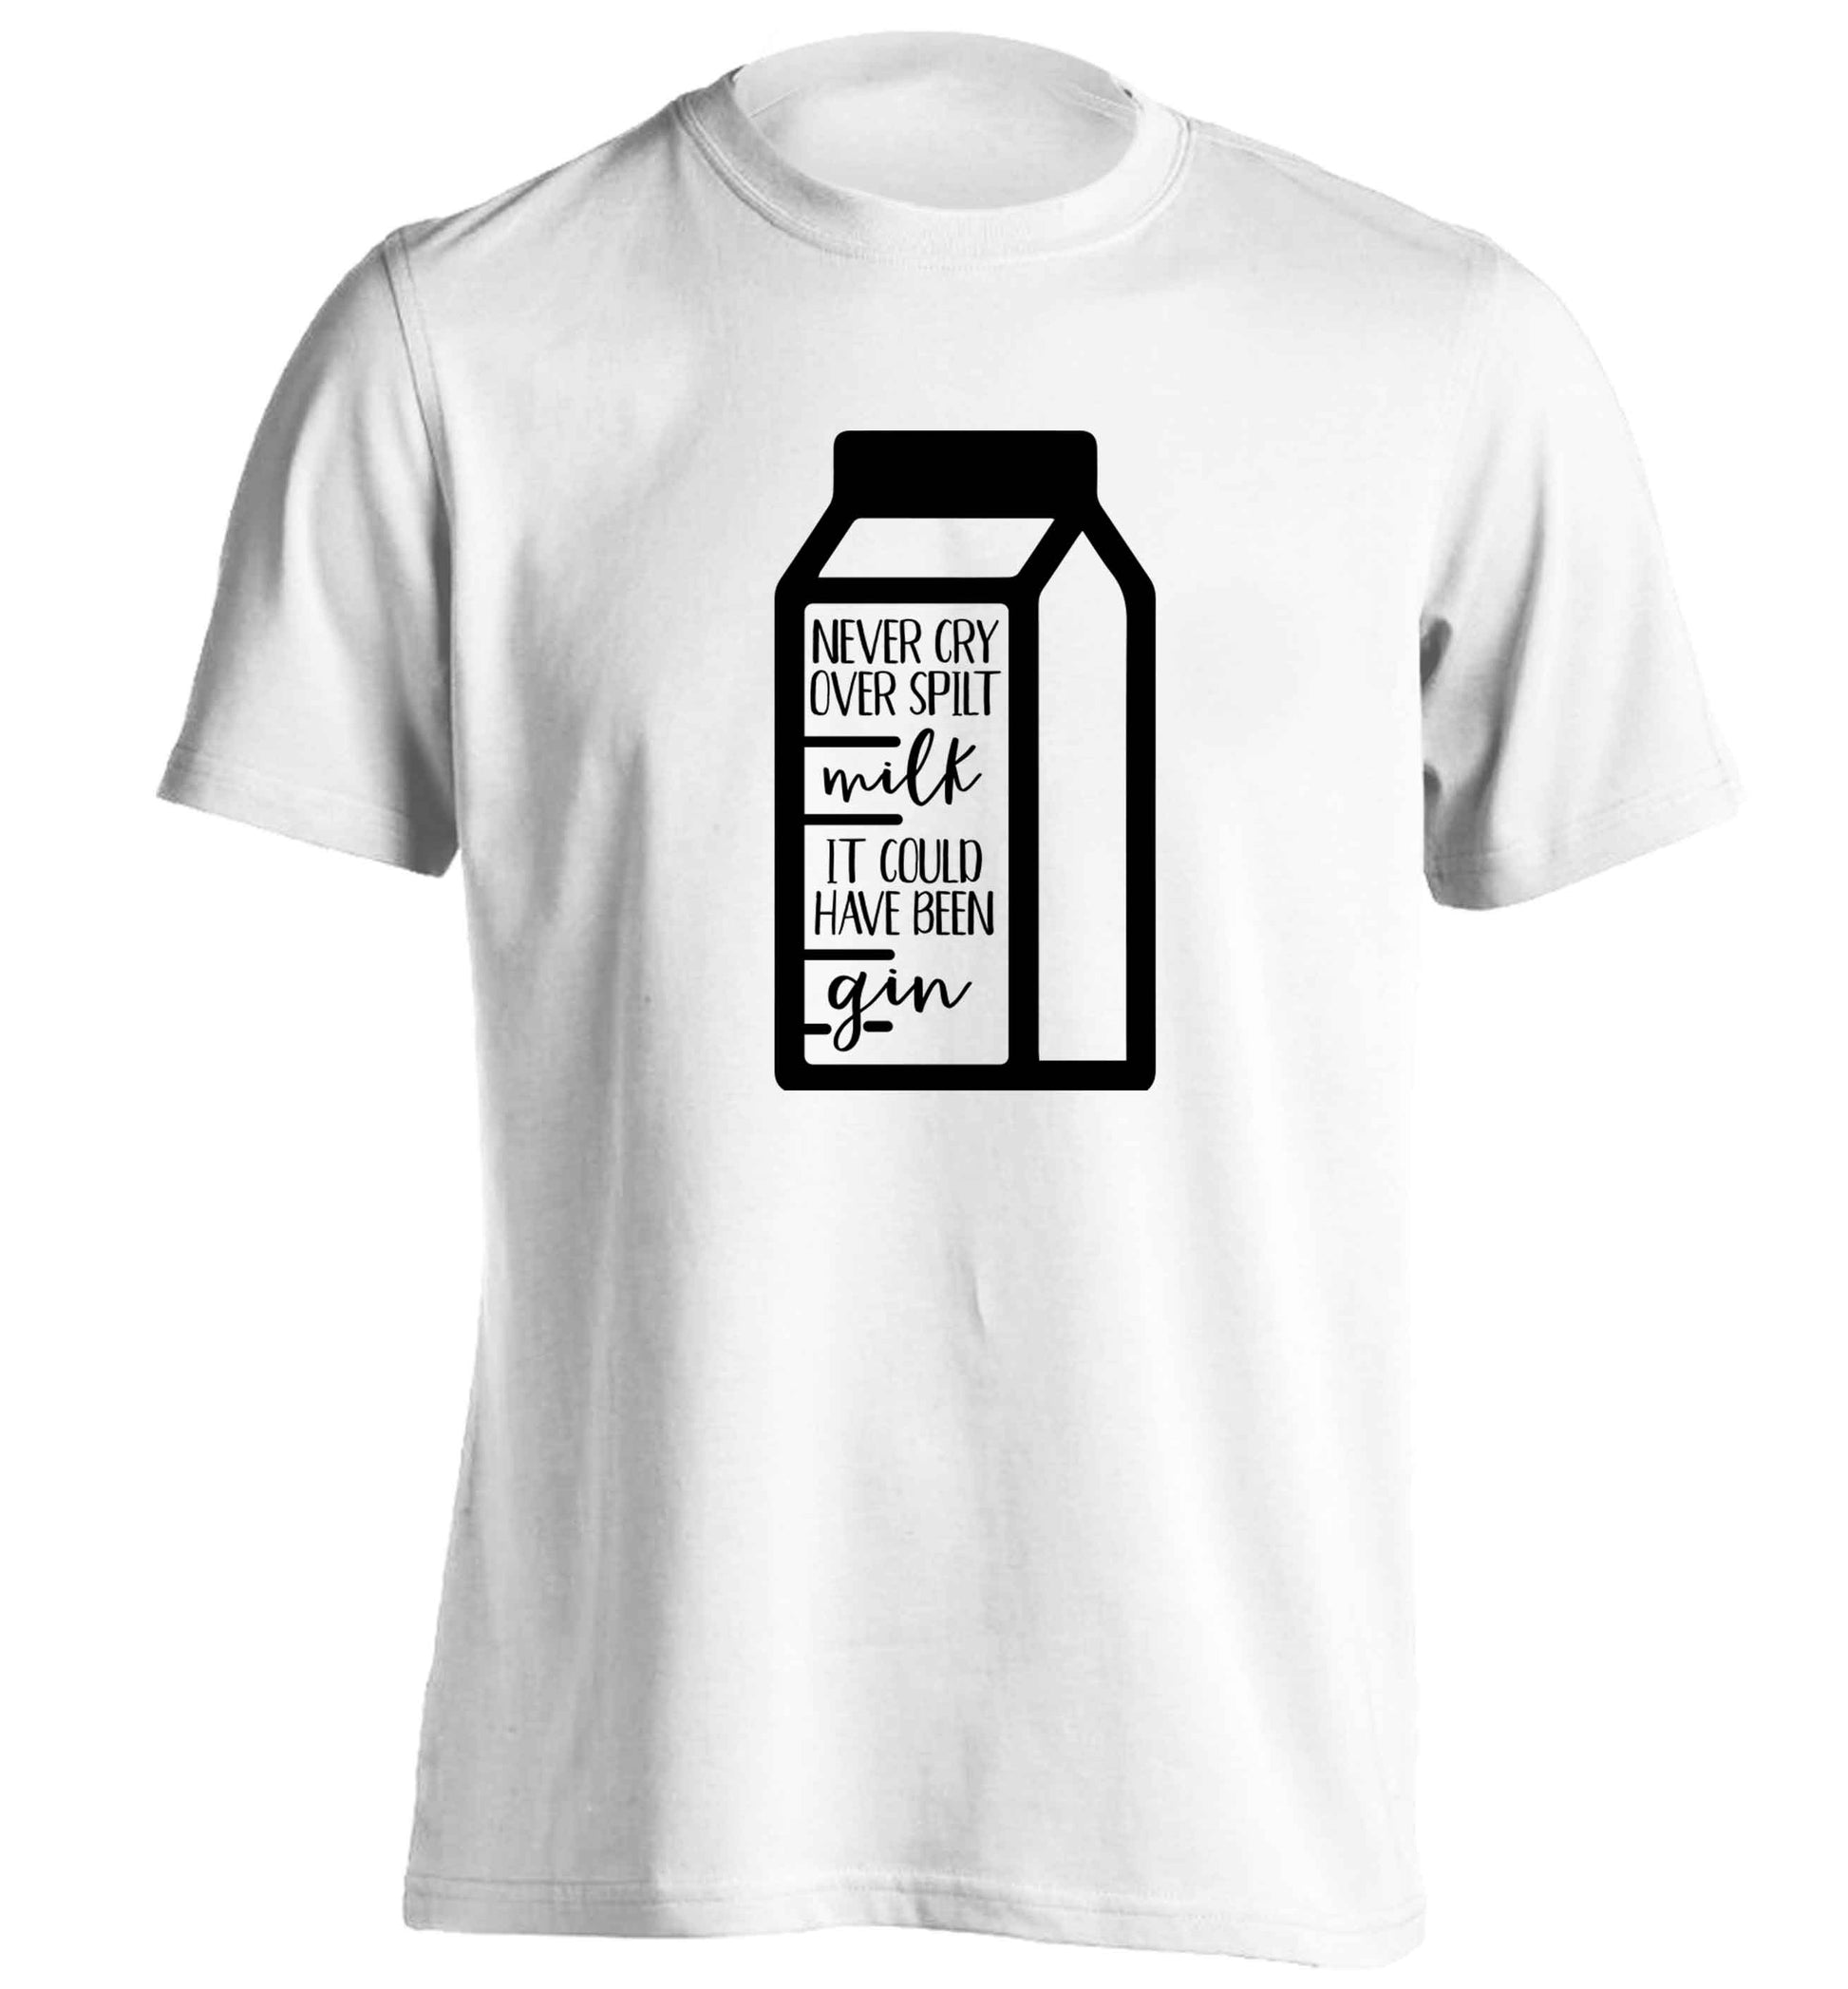 Never cry over spilt milk, it could have been gin adults unisex white Tshirt 2XL